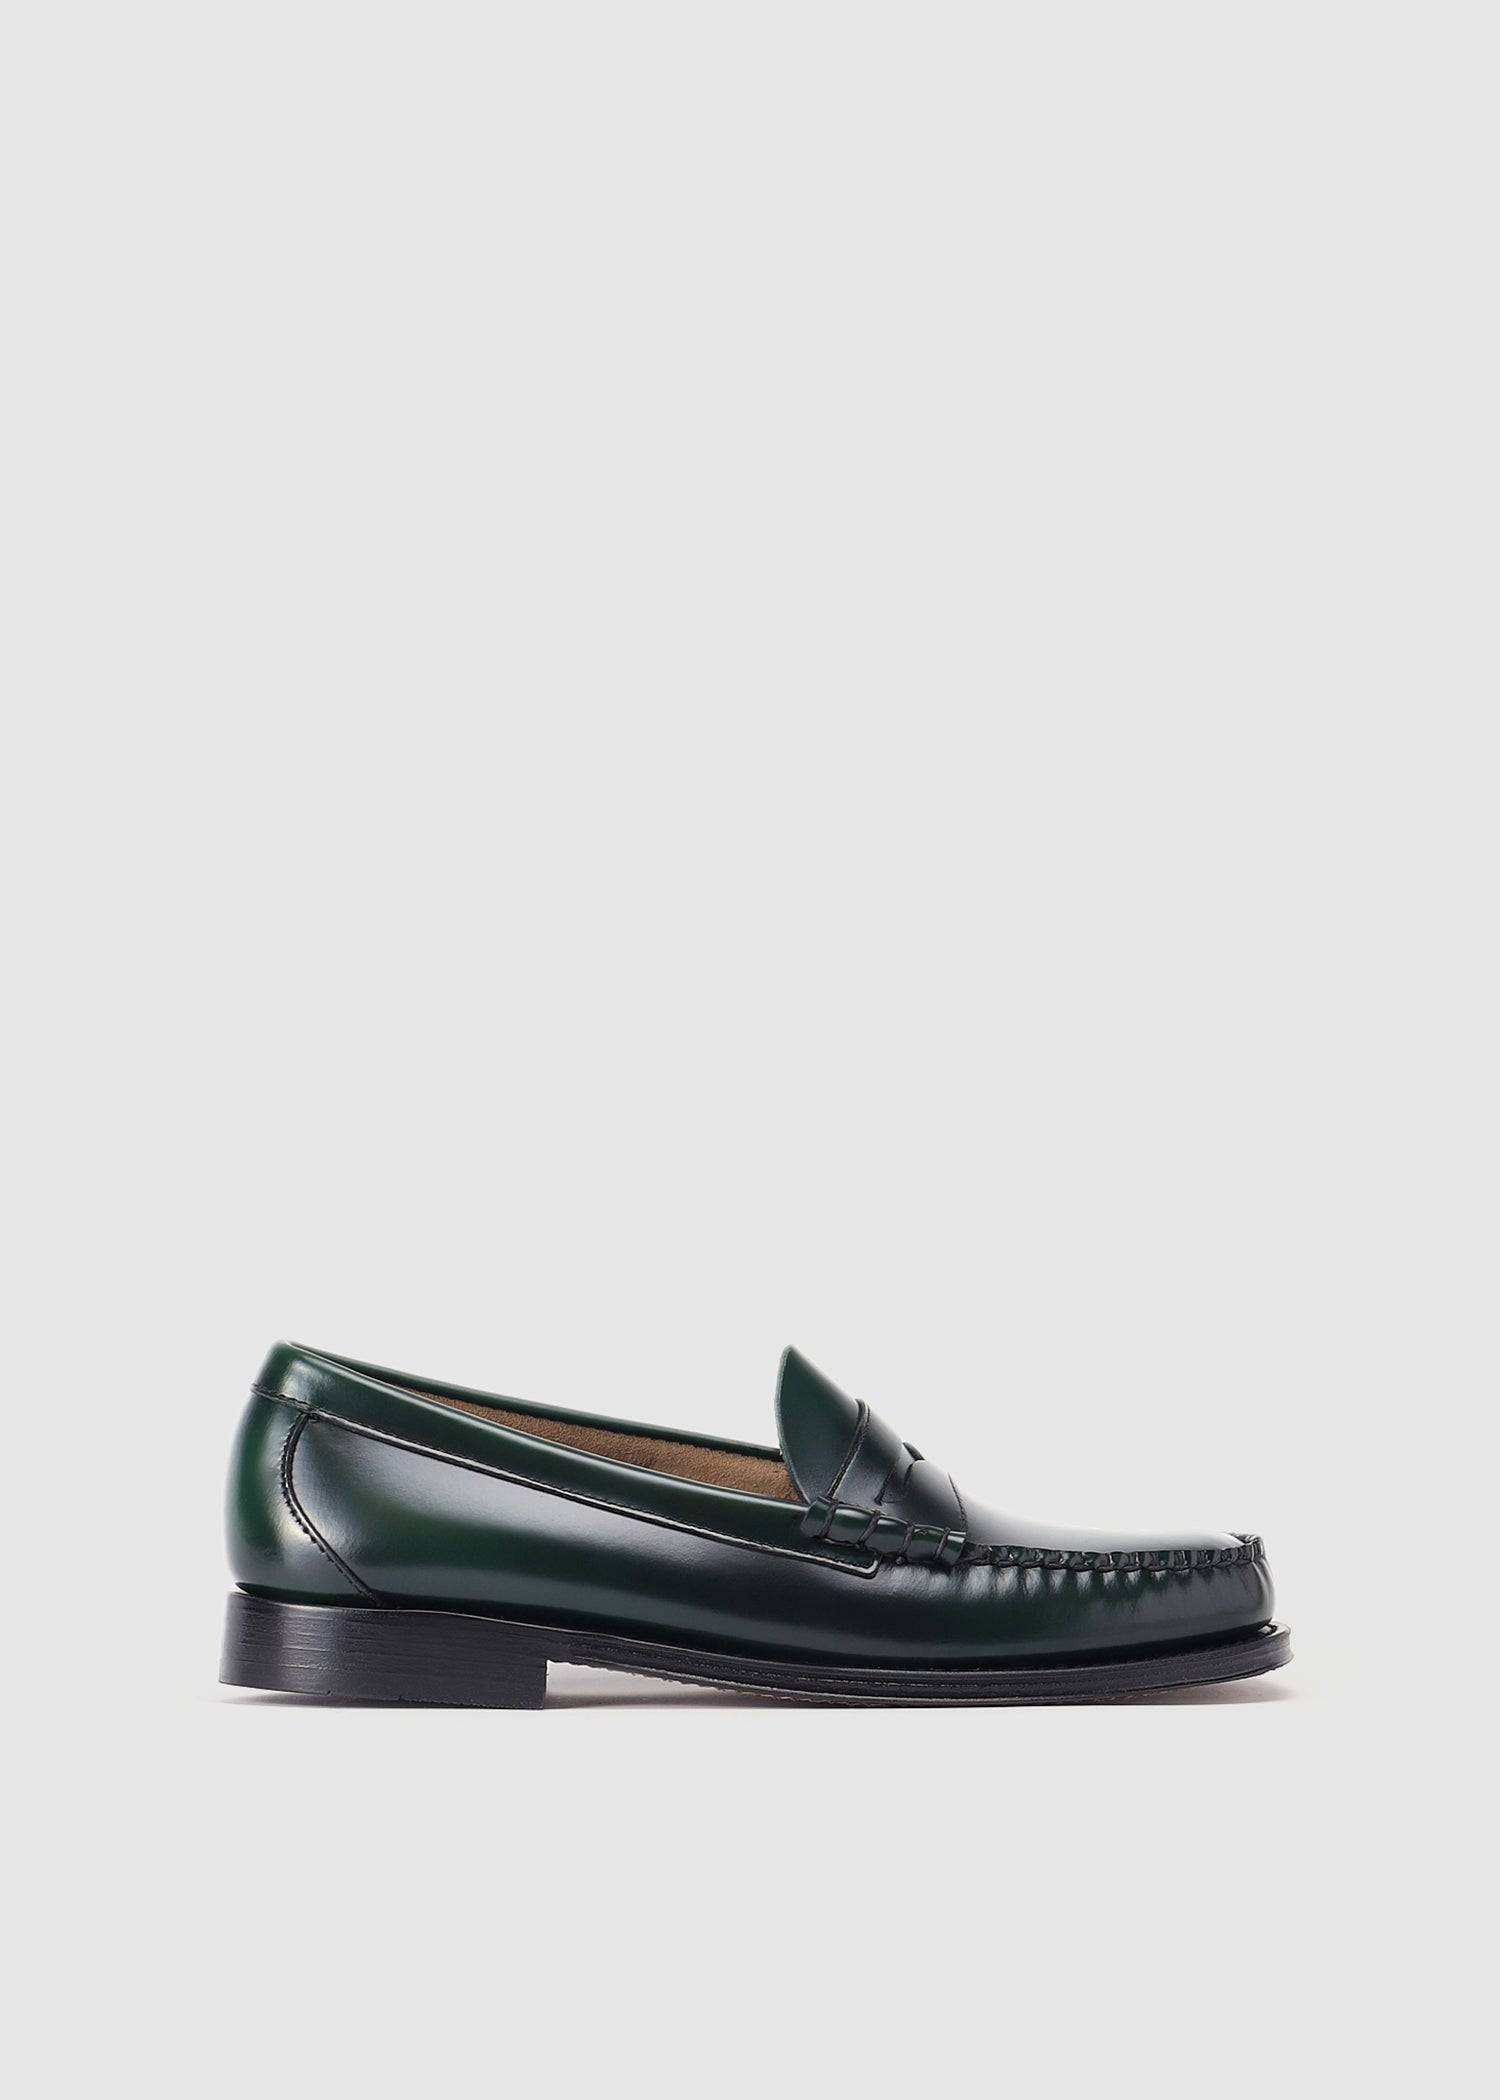 Image of G.H.Bass Mens Weejun Heritage Larson Moc Penny Loafers In Dark Green